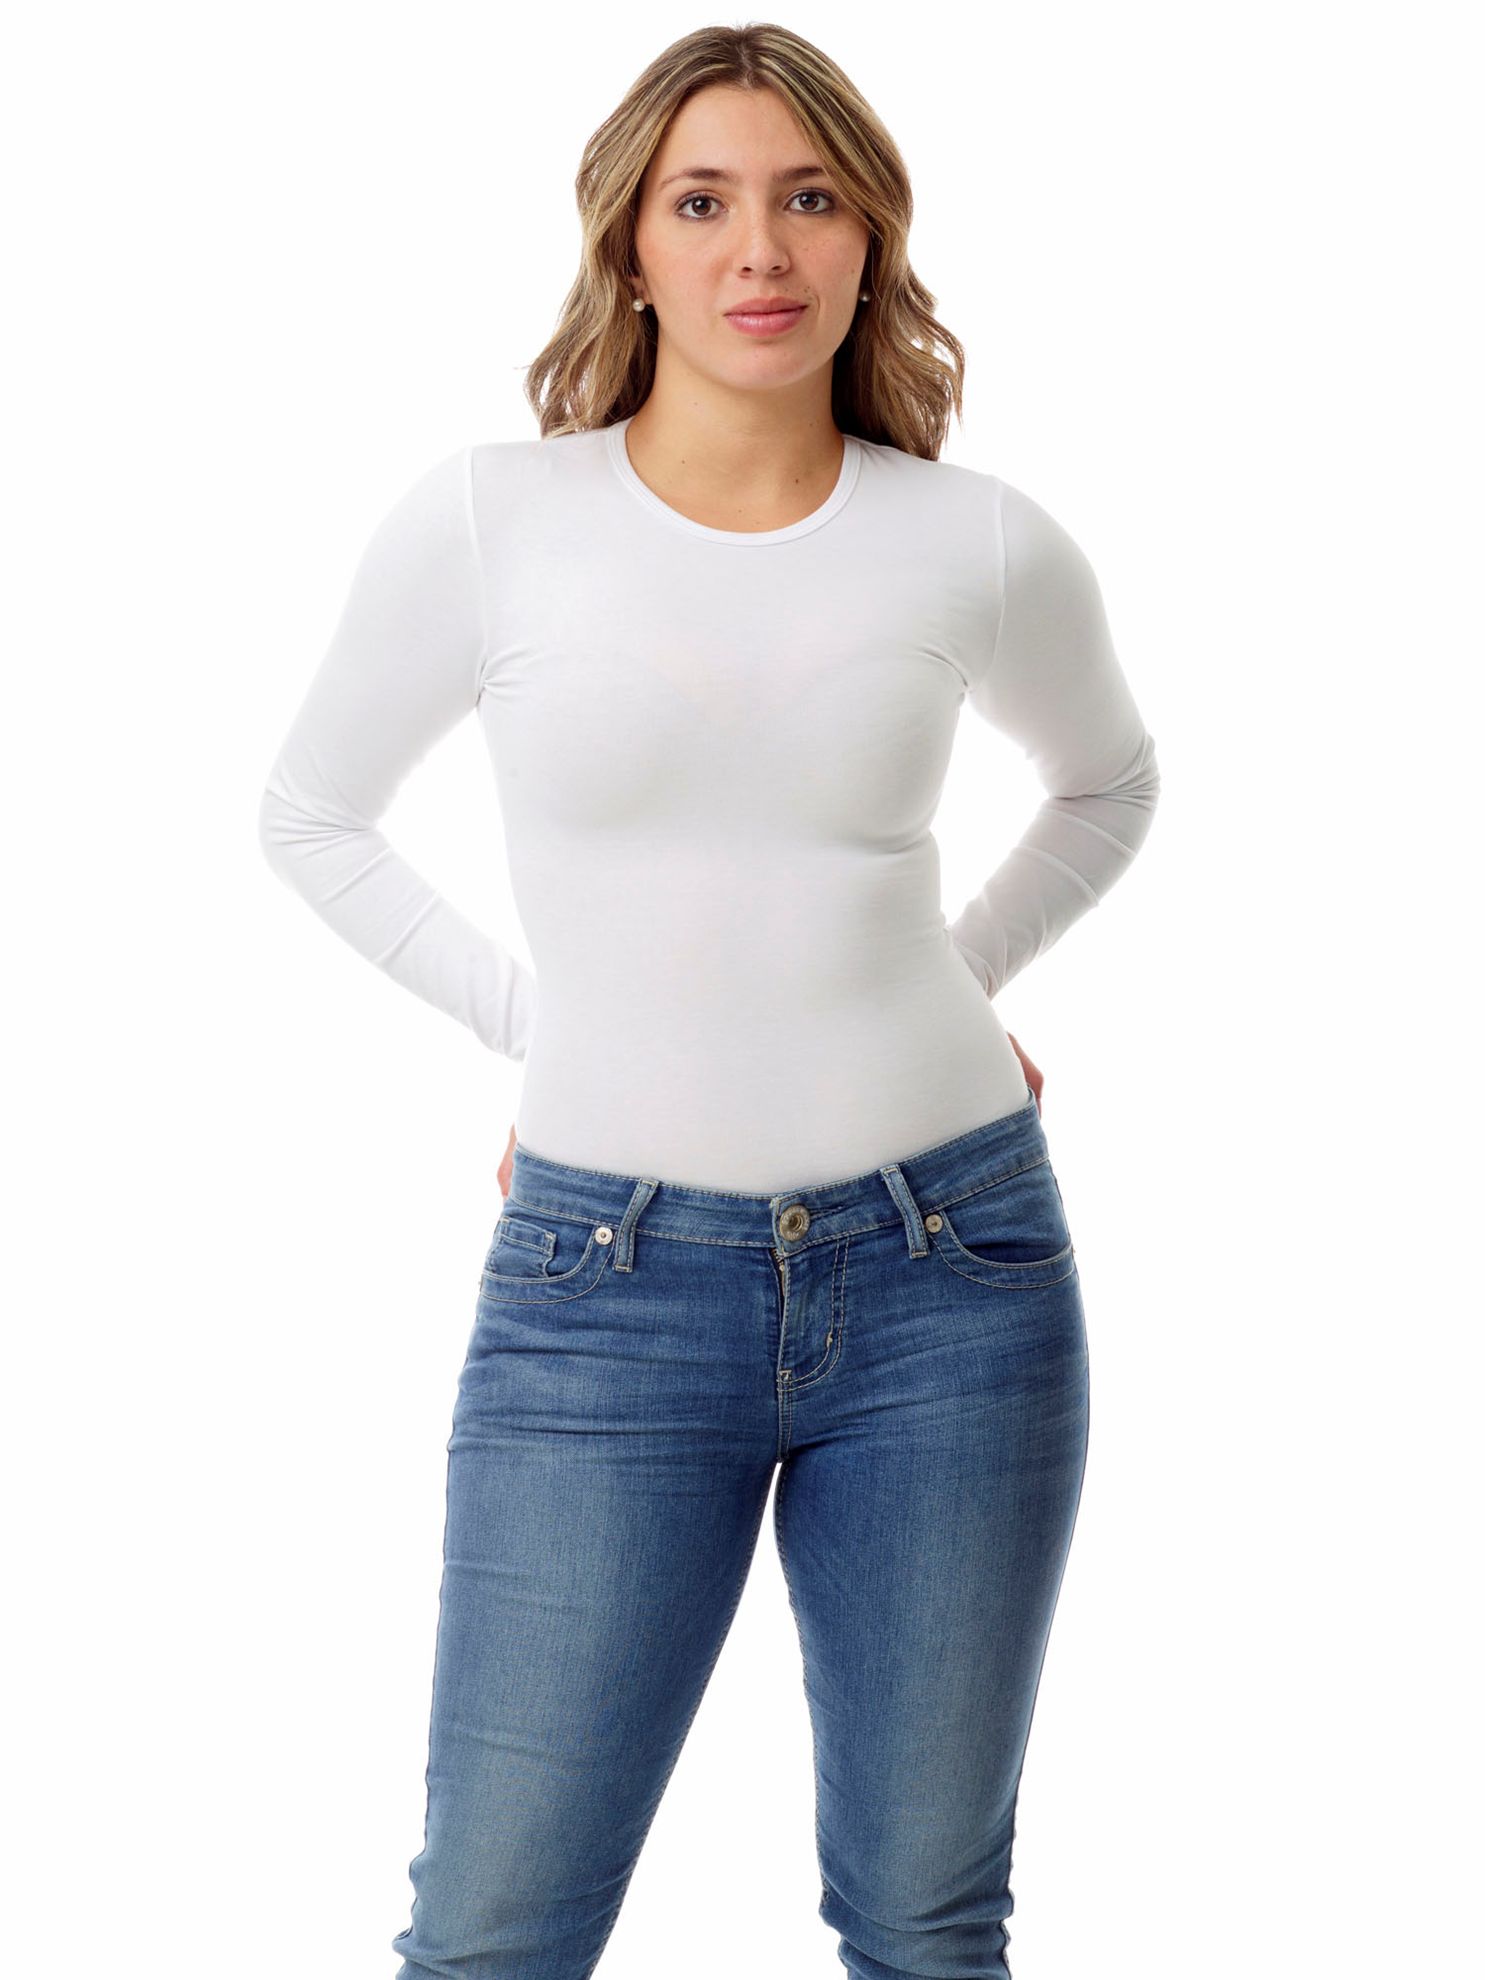 Underworks Womens Ultra Light Cotton Spandex Compression Crew Neck Top Long  Sleeves - White - XS